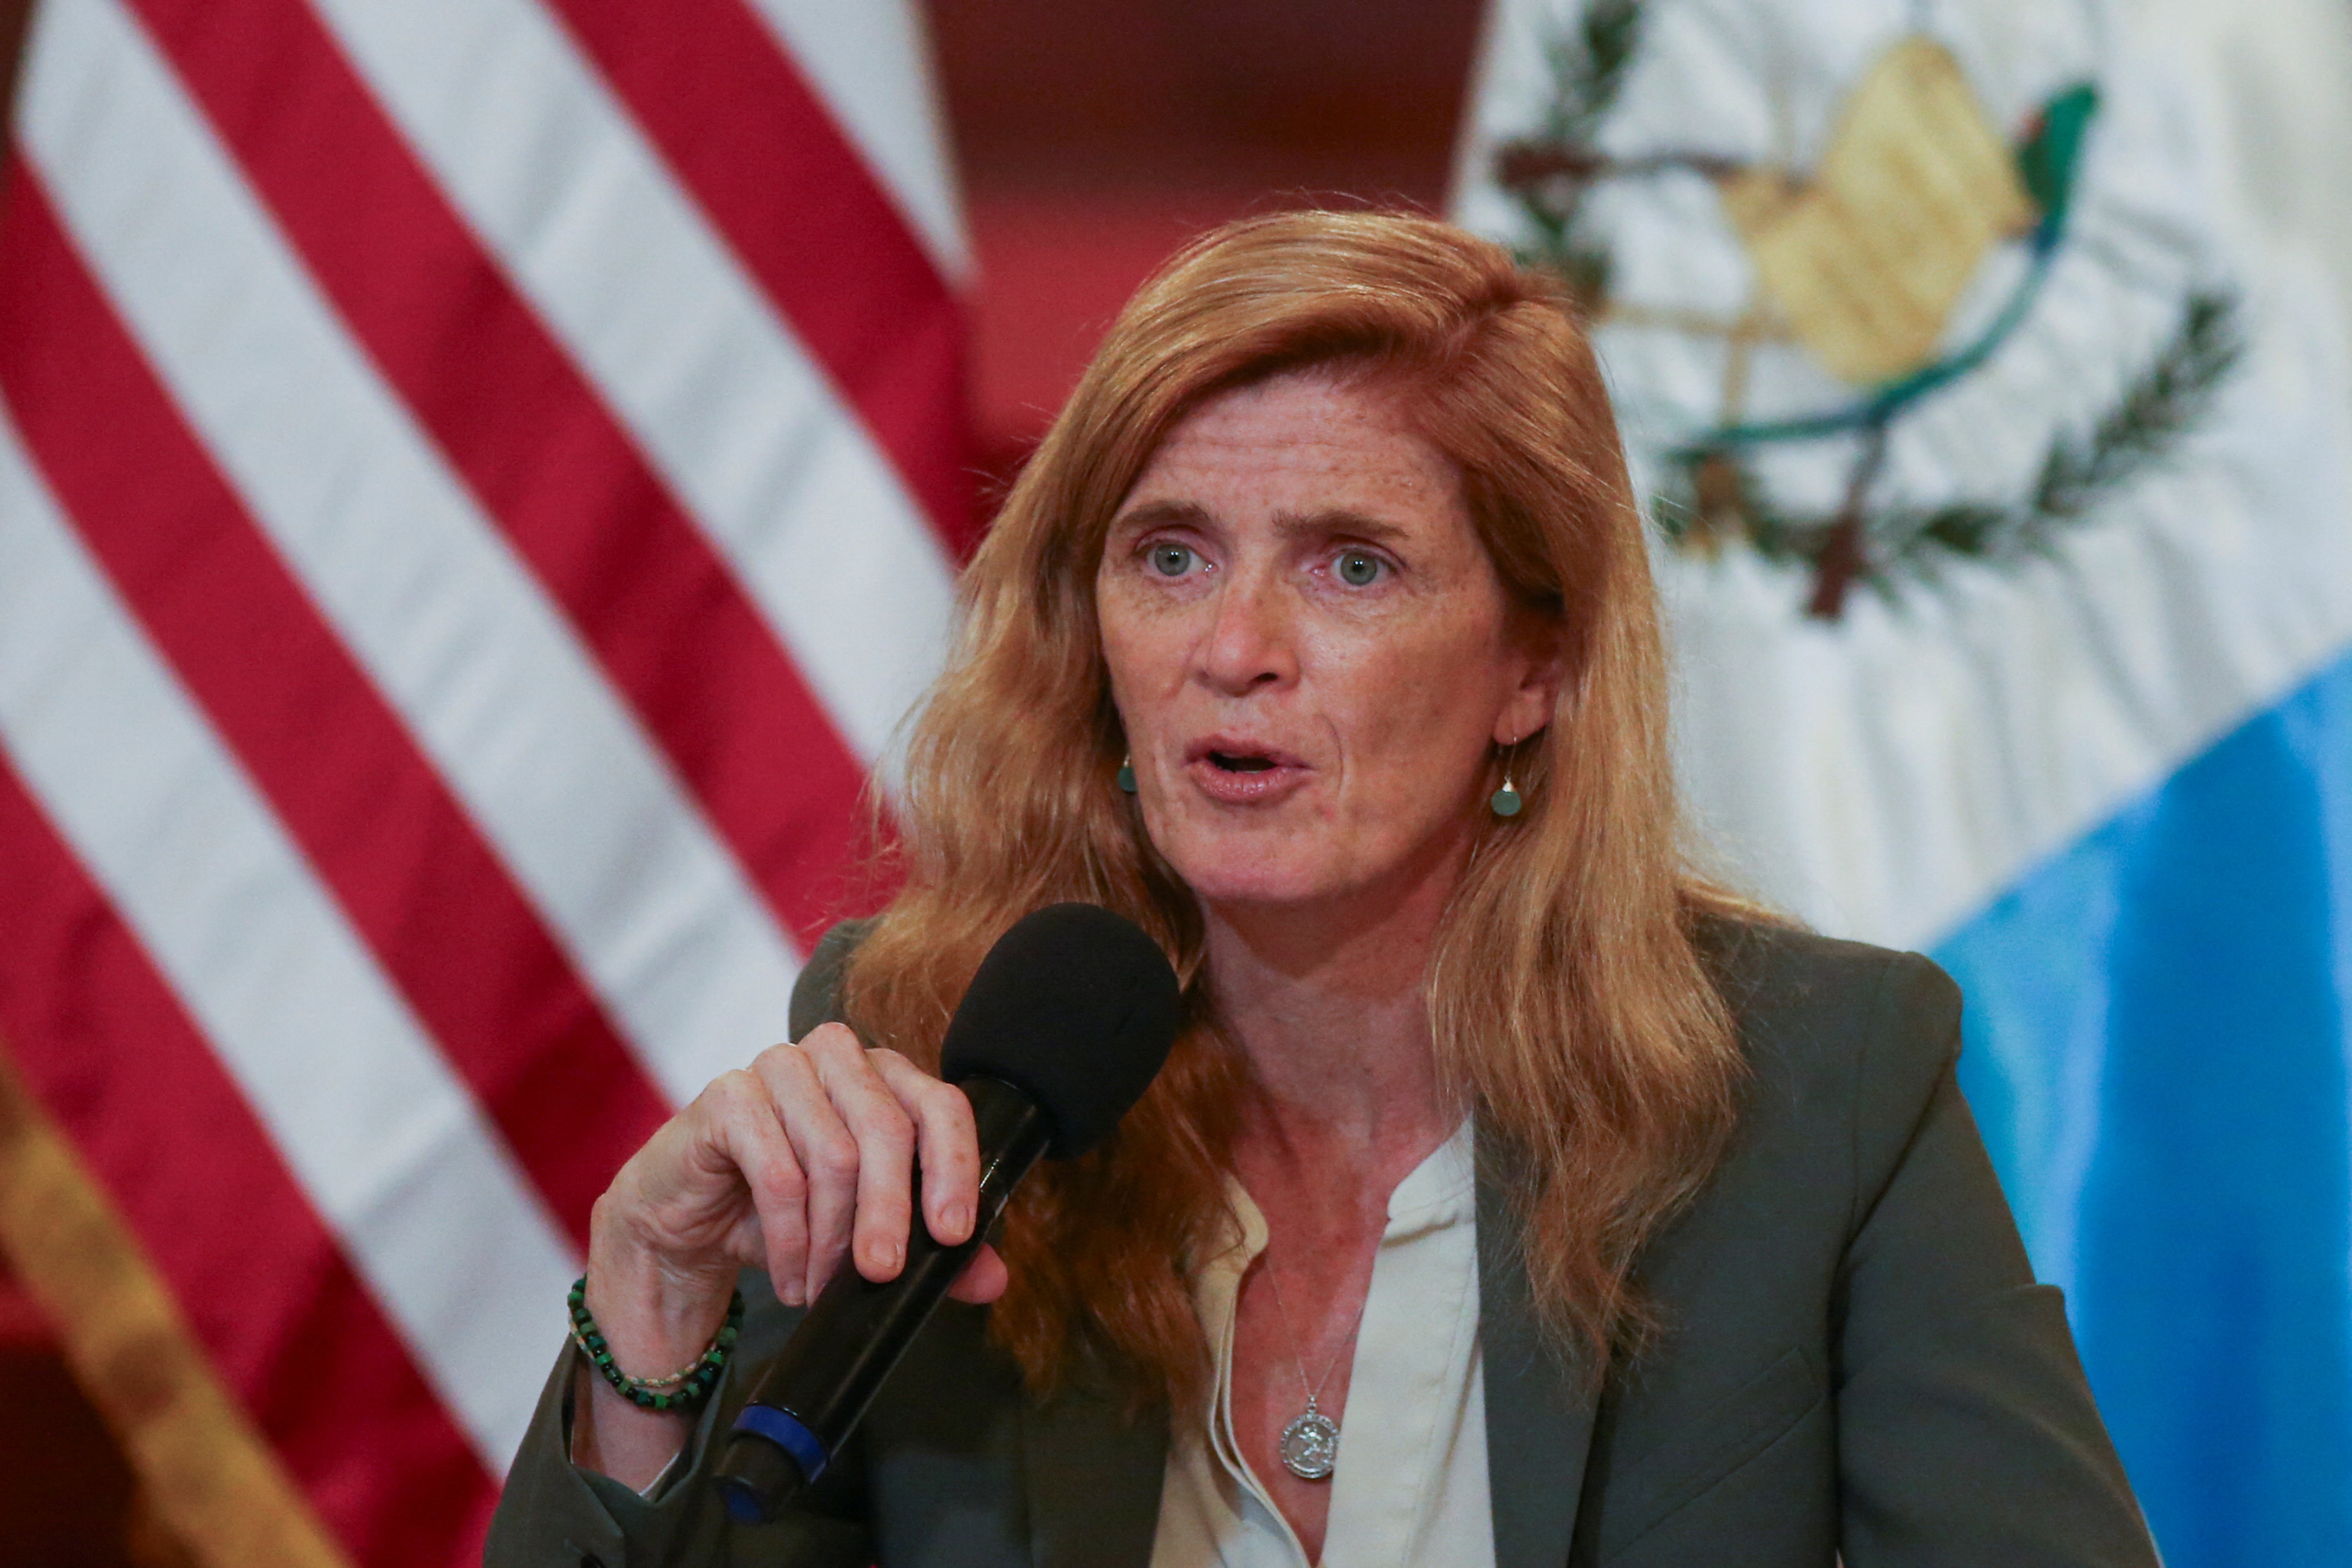 US Agency for International Development (USAID) Administrator Samantha Power speaks during a news conference at the National Palace of Culture in Guatemala City, Guatemala, January 15, 2024.